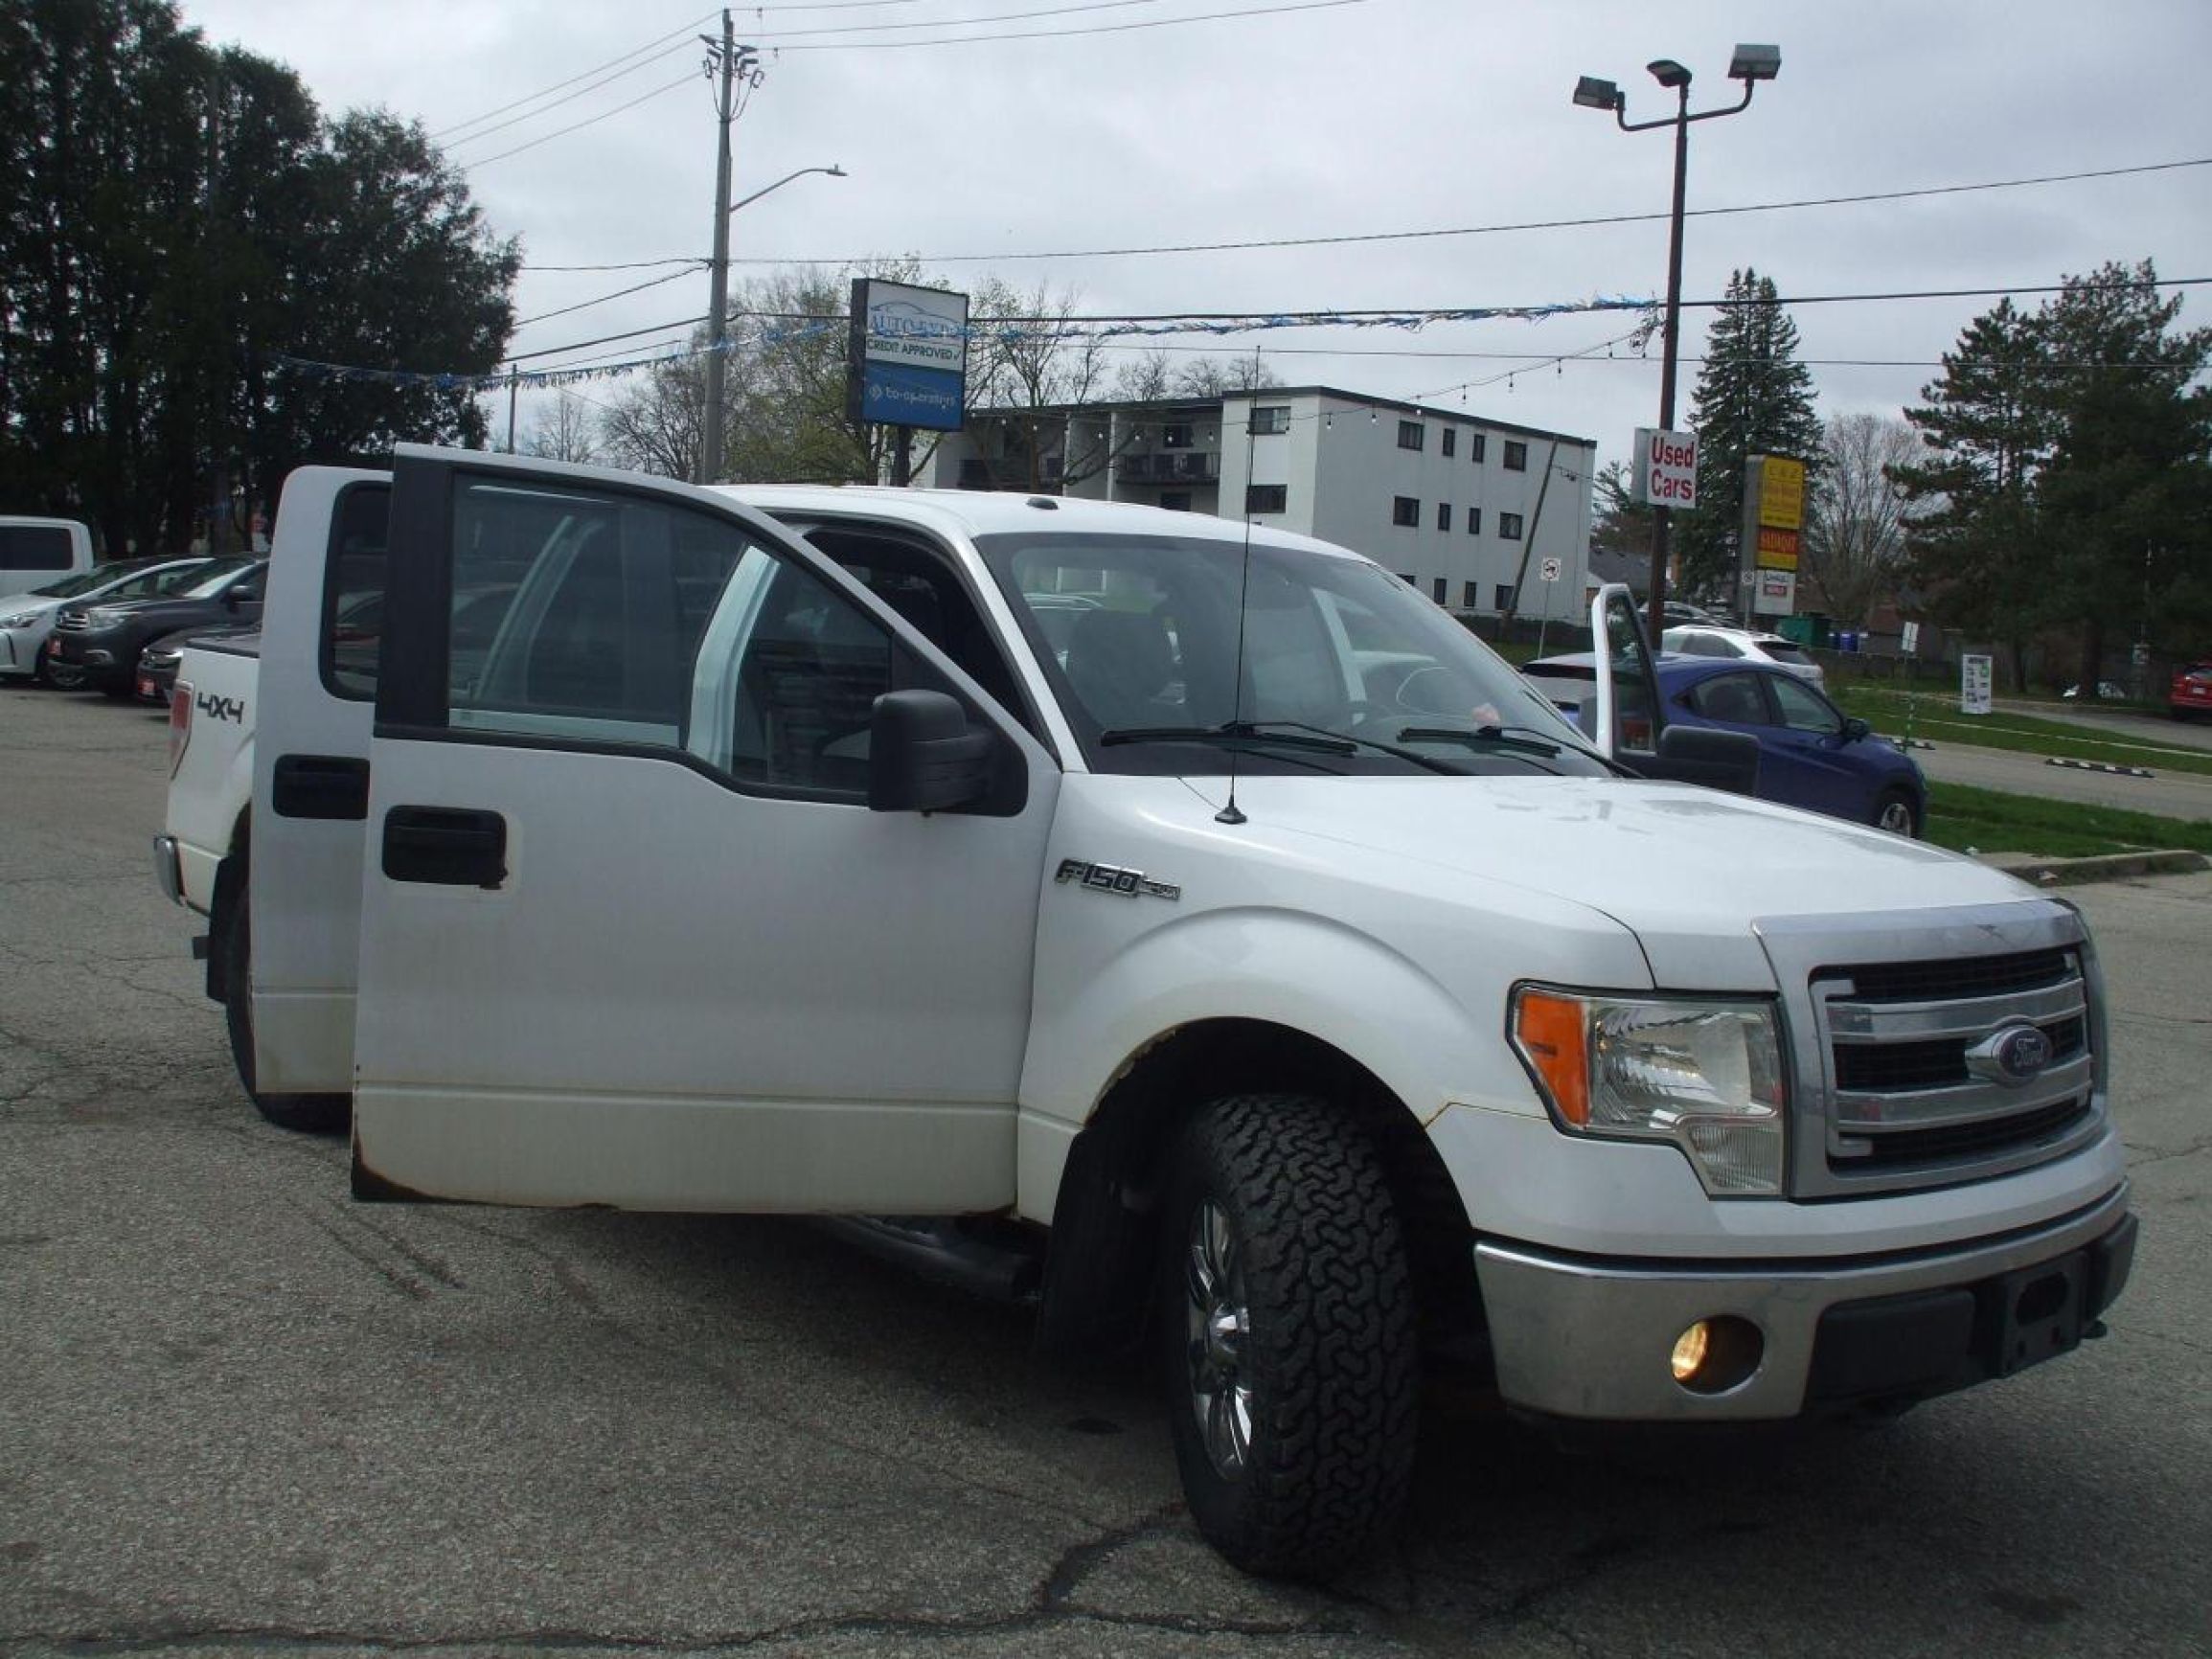 2014 Ford F-150 XLT,4WD,SuperCrew,Tinted,Bluetooth,Certified